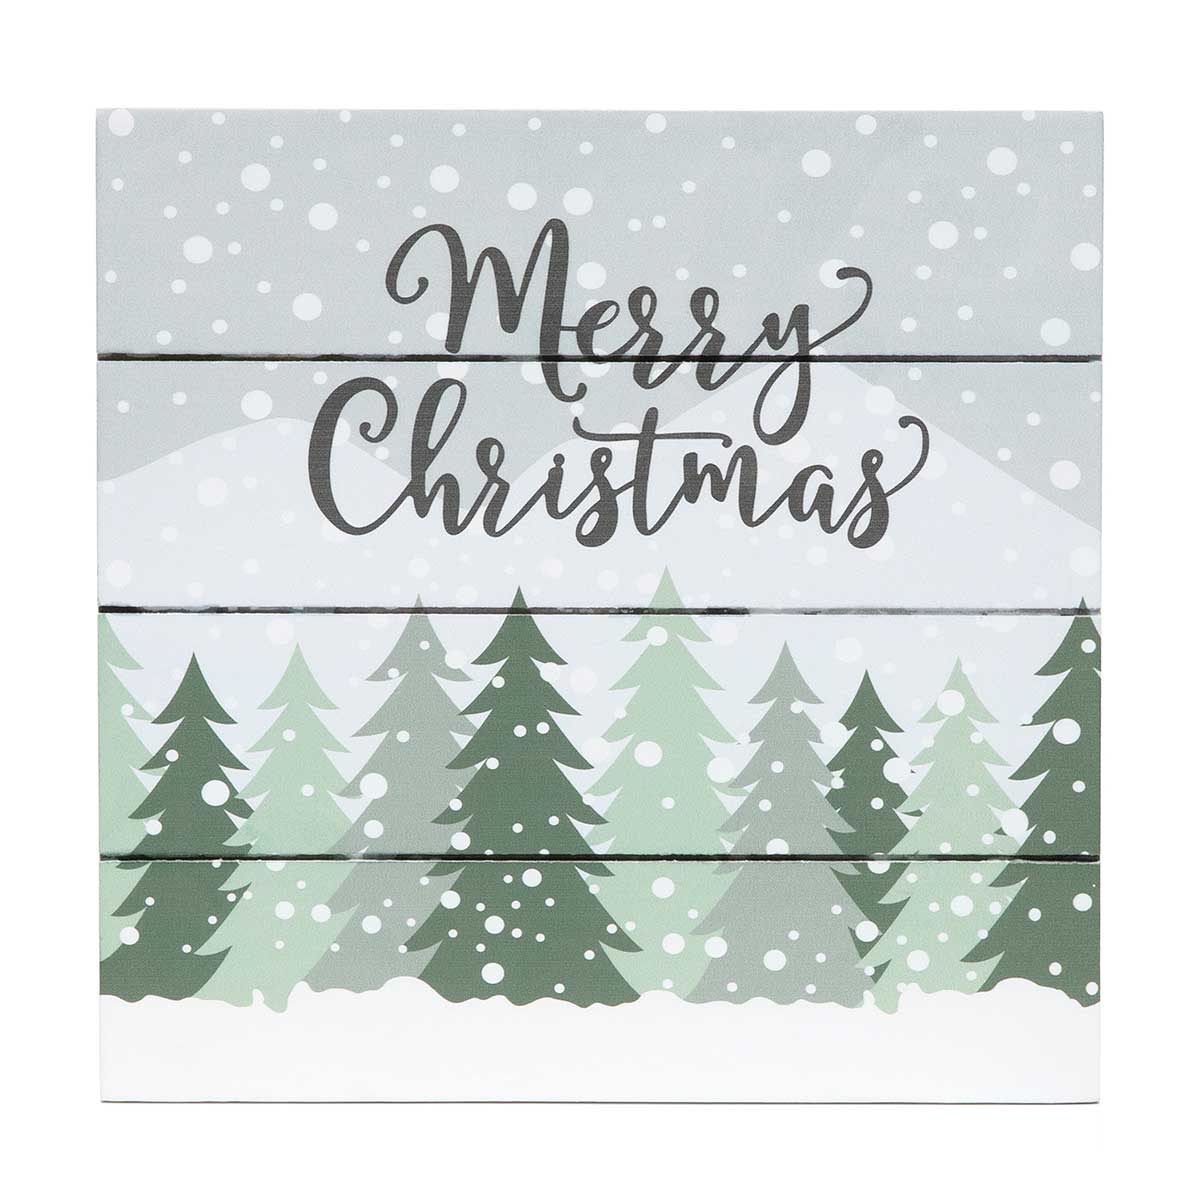 !SILENT NIGHT MERRY CHRISTMAS SIGN